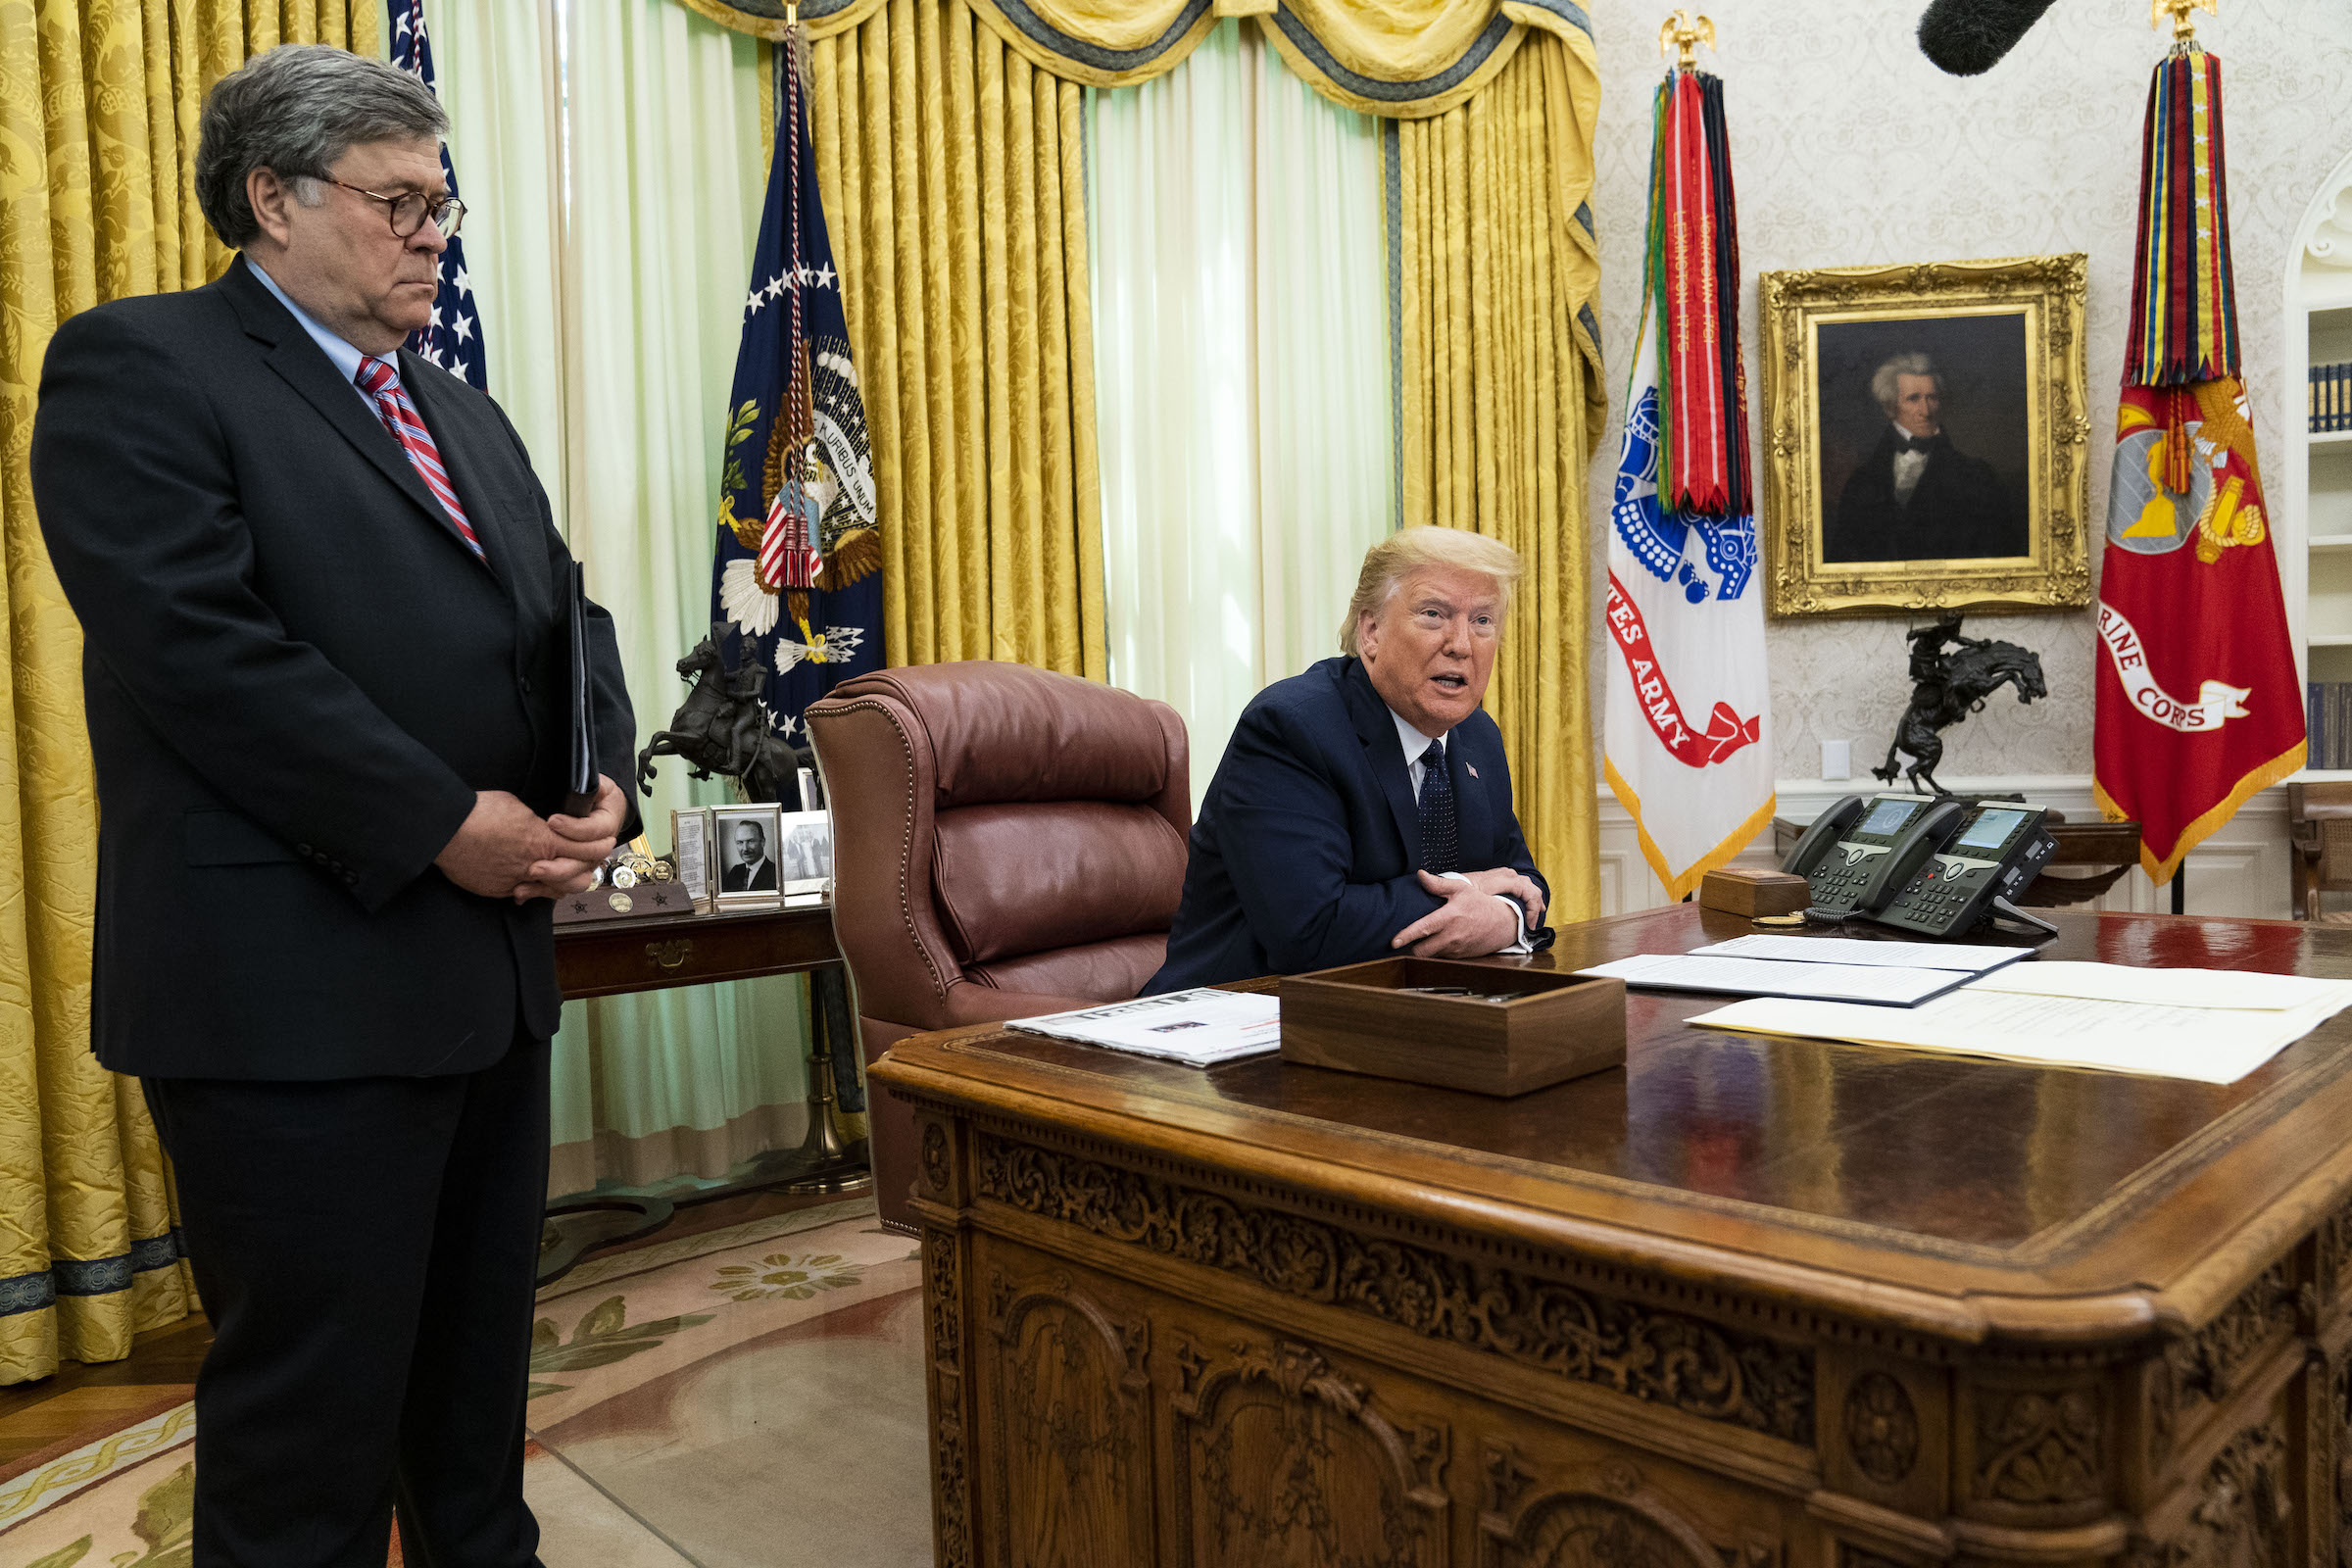 President Donald Trump, right, speaks while Attorney General William Barr stands during an executive order signing event in Washington, D.C. on May 28, 2020. (Doug Mills—The New York Times/Bloomberg/Getty Images)